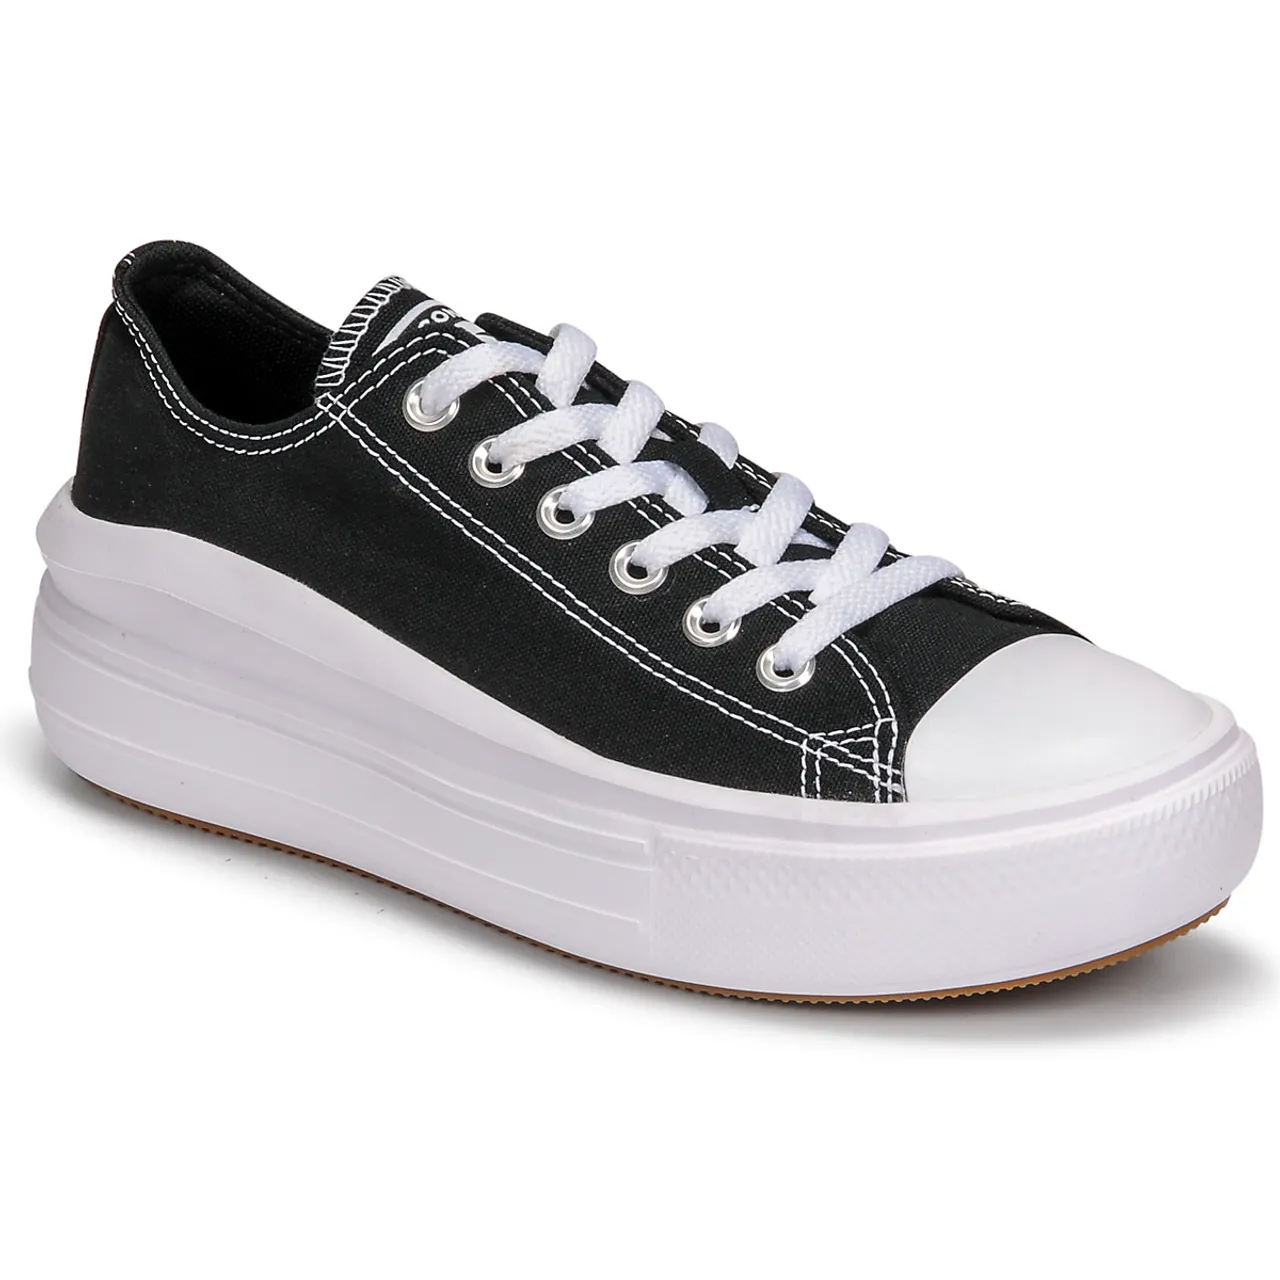 Converse  CHUCK TAYLOR ALL STAR MOVE CANVAS COLOR OX  women's Shoes (Trainers) in Black